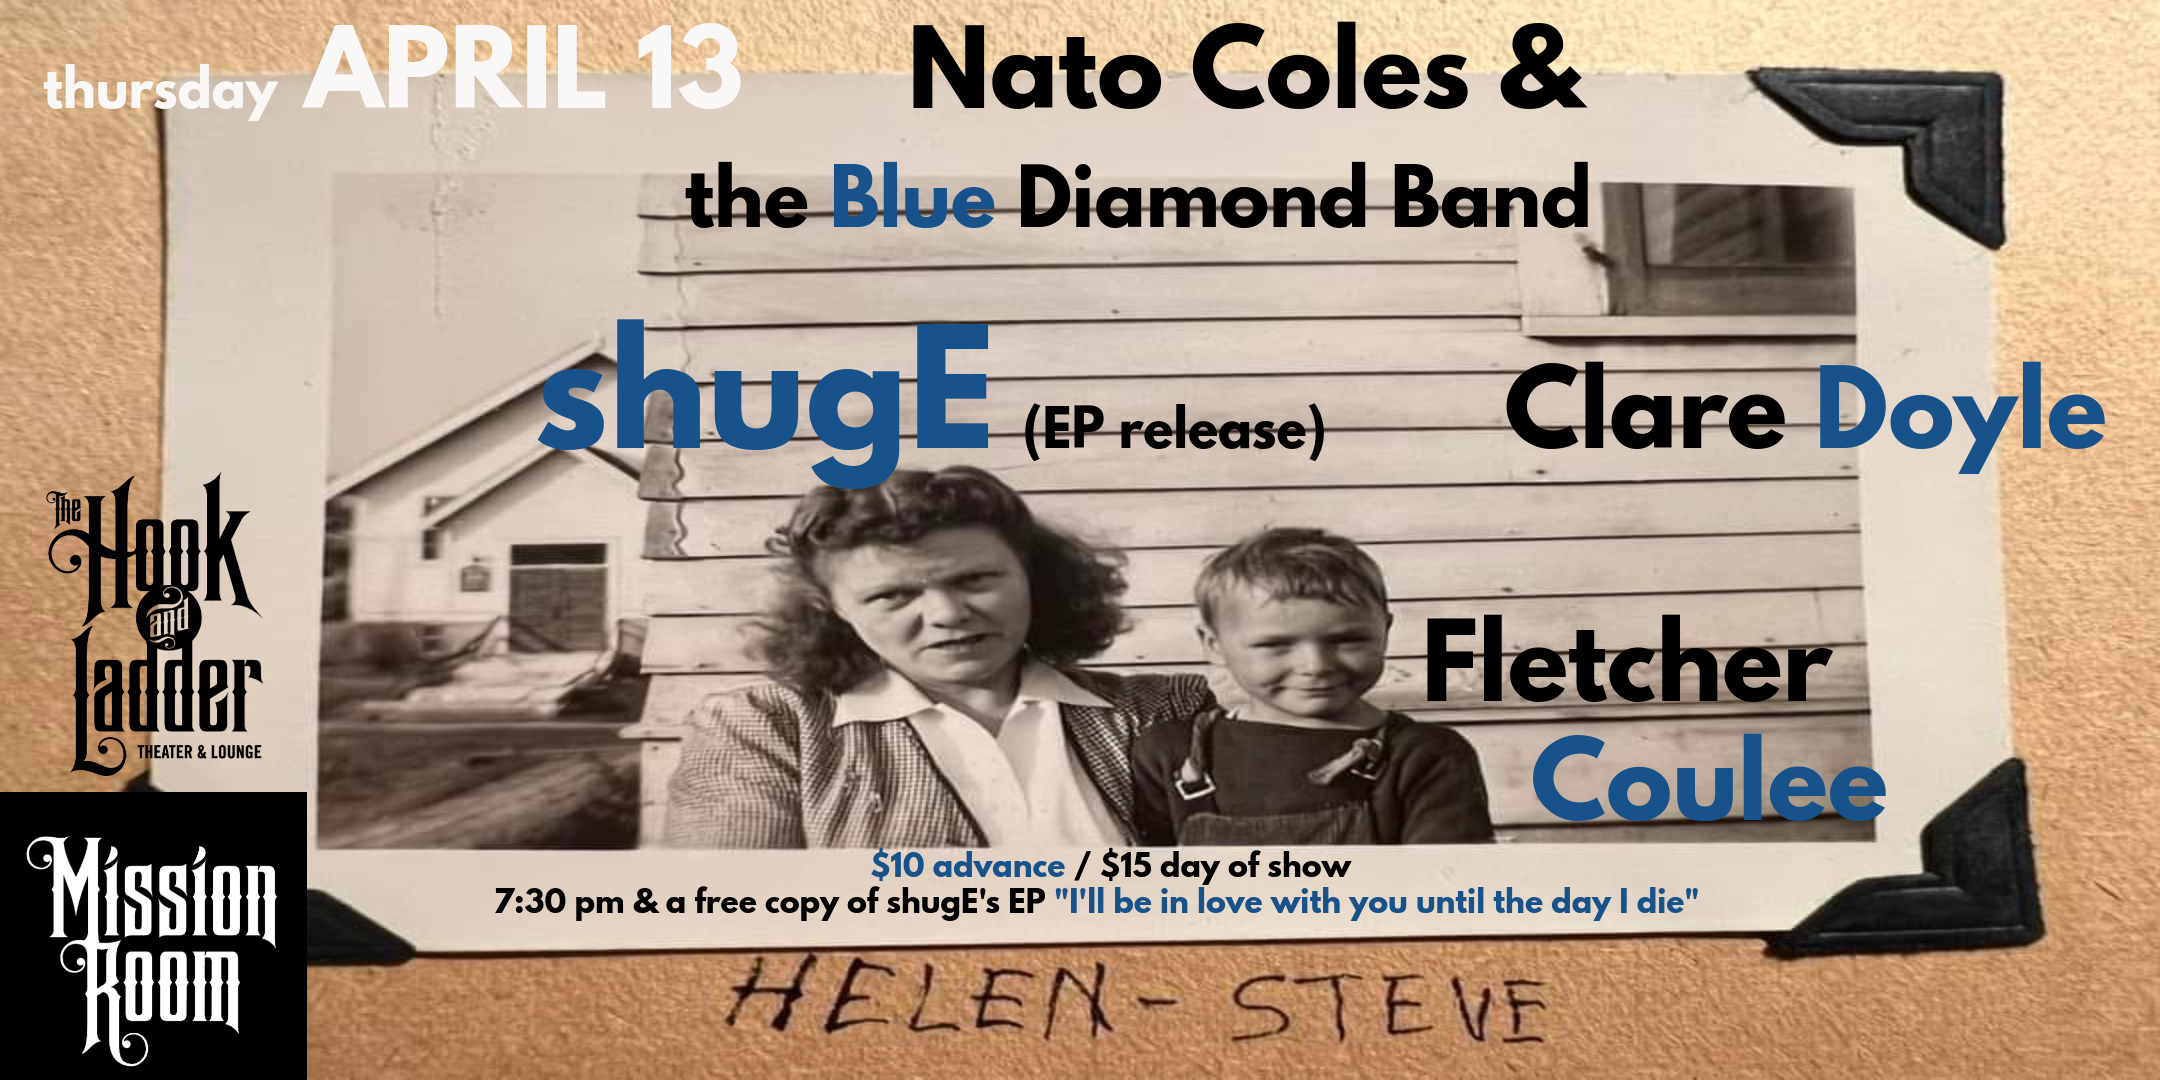 shugE EP Release with Nato Cole & The Blue Diamond Band, Clare Doyle, Fletcher Coulee Thursday, April 13th 2023 Mission Room at The Hook & Ladder Theater Doors 7:30pm :: Music 8:00pm :: 21+ $10 ADV / $15 DOS